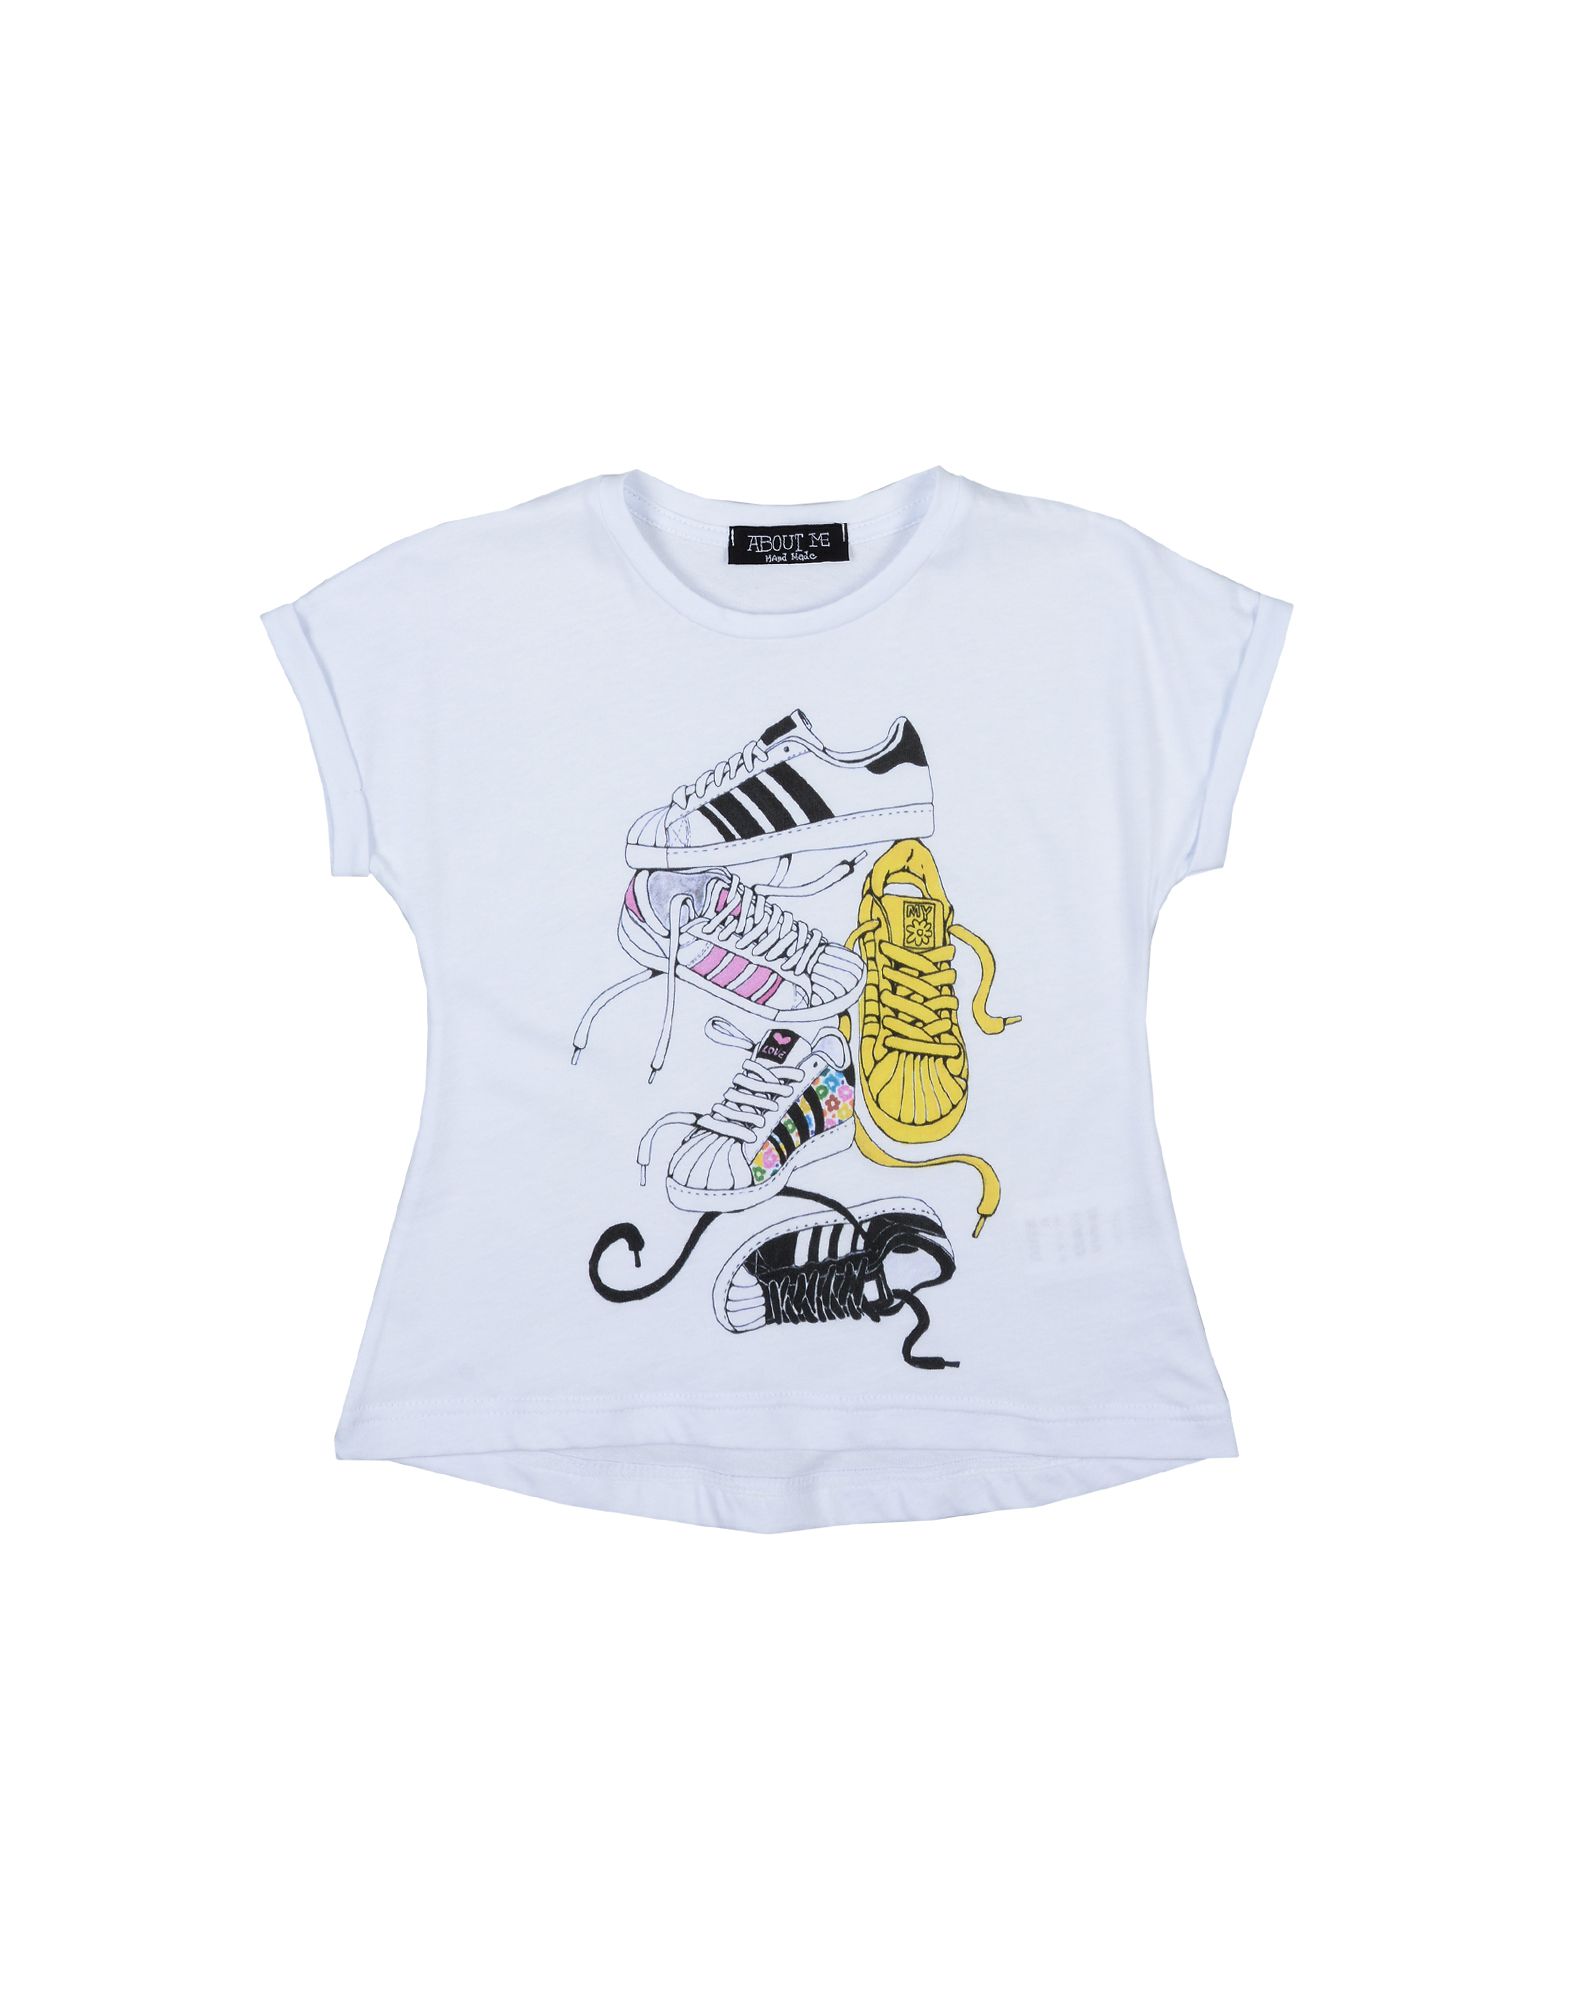 About Me Handmade Kids' T-shirts In White